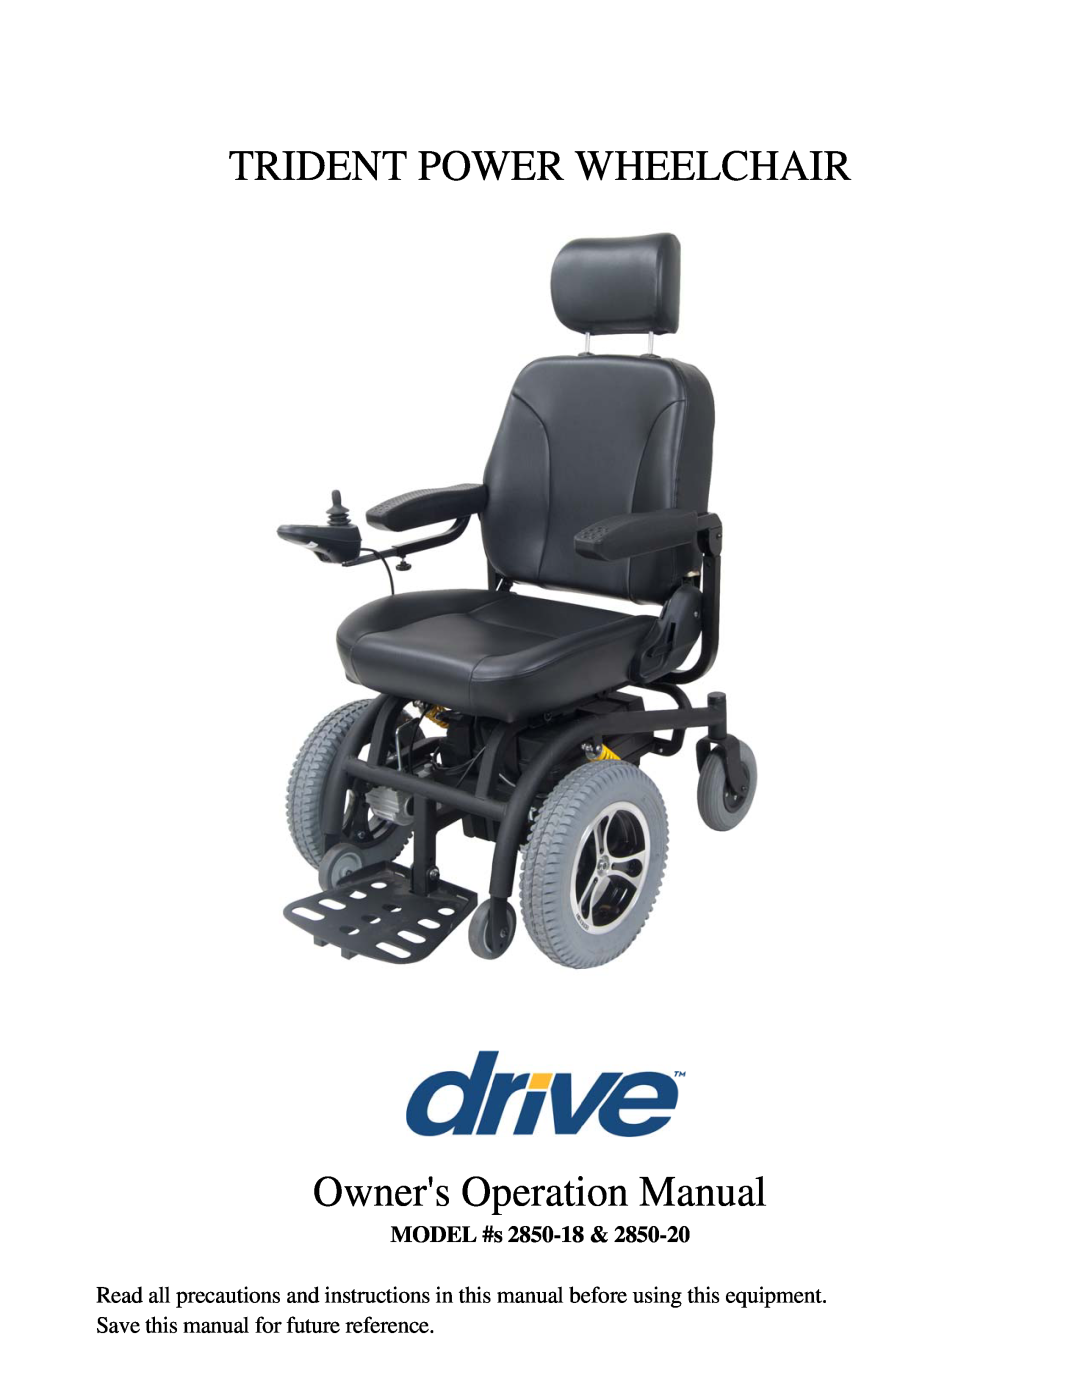 Drive Medical Design 2850-20, 2850-18 manual TRIDENT POWER WHEELCHAIR Owners Operation M anual, MODEL #s 